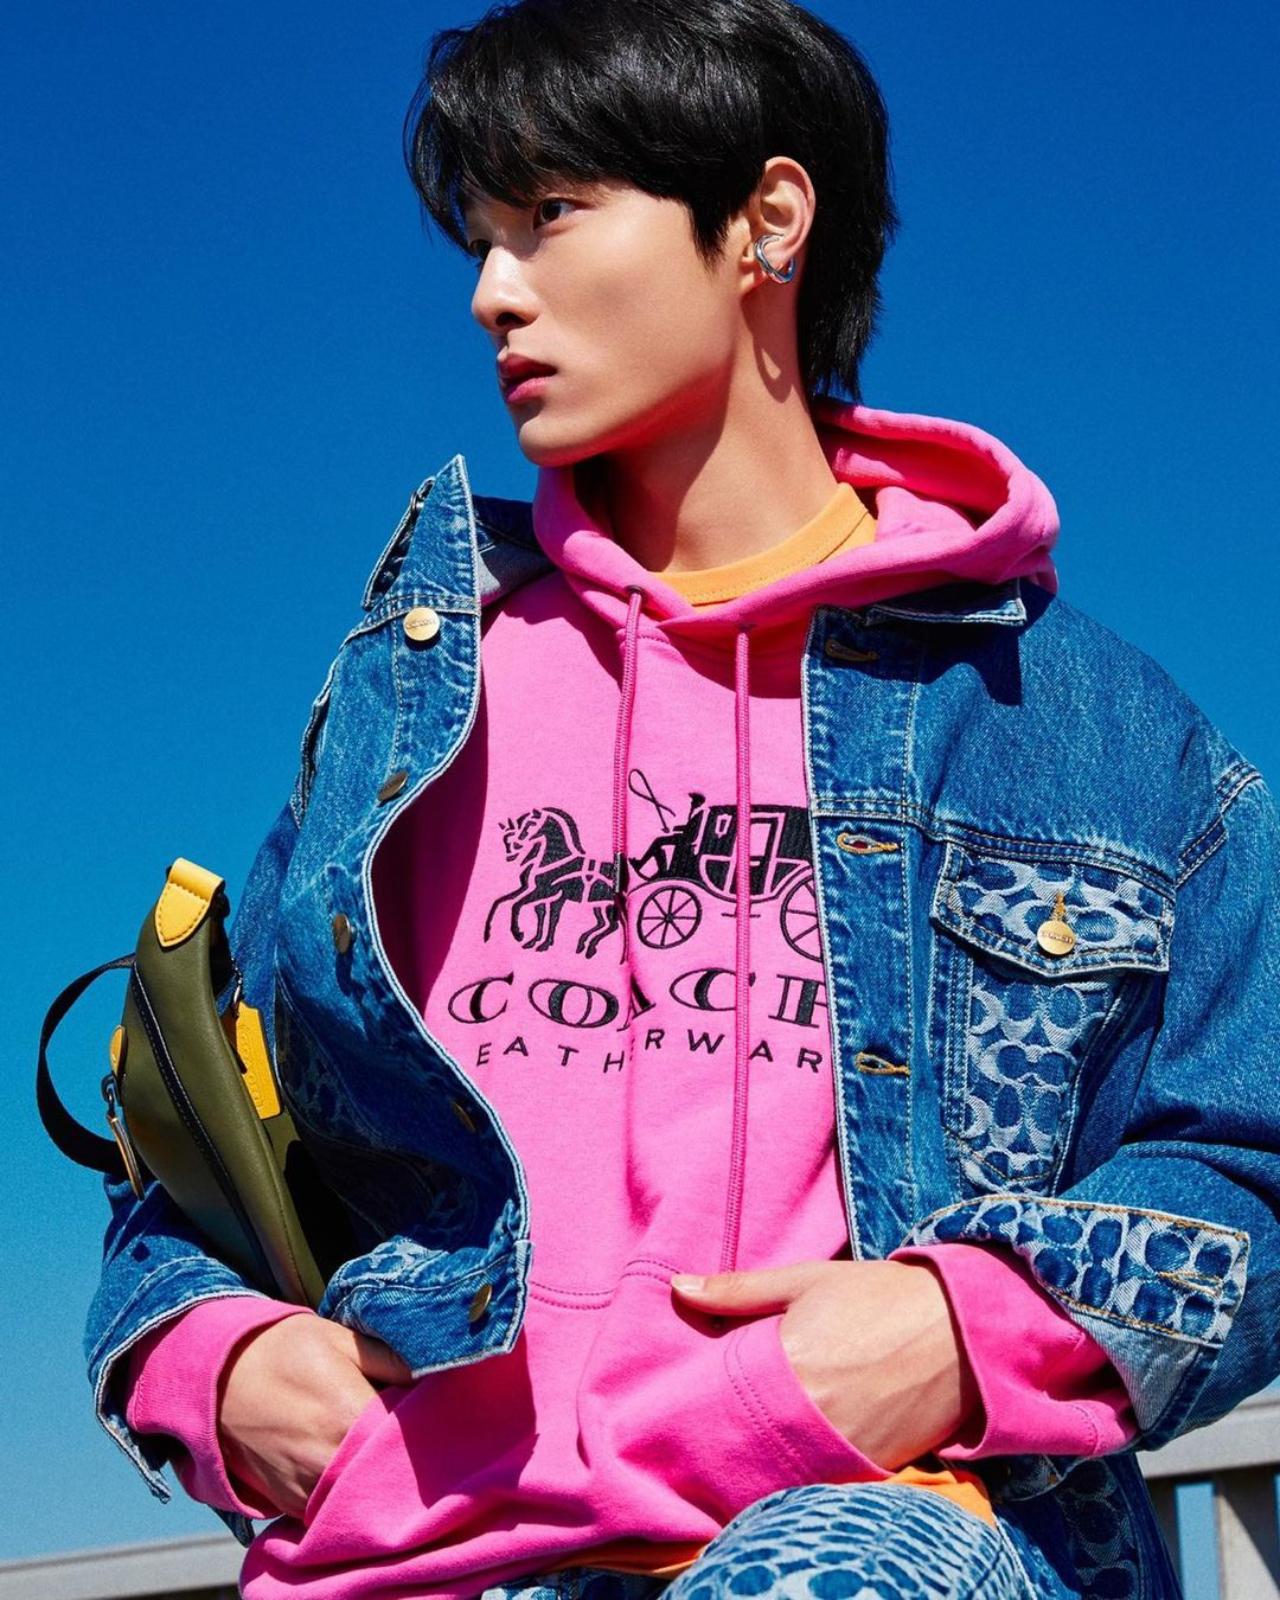 Chan Young has been equally as excited about being part of the Coach roster. For the actor, fashion isn't just about attire, it's about personality and self-expression. In an interview with Lifestyle Asia, he revealed that that he wanted to learn more about the label's history and heritage, and carry the legacy onwards